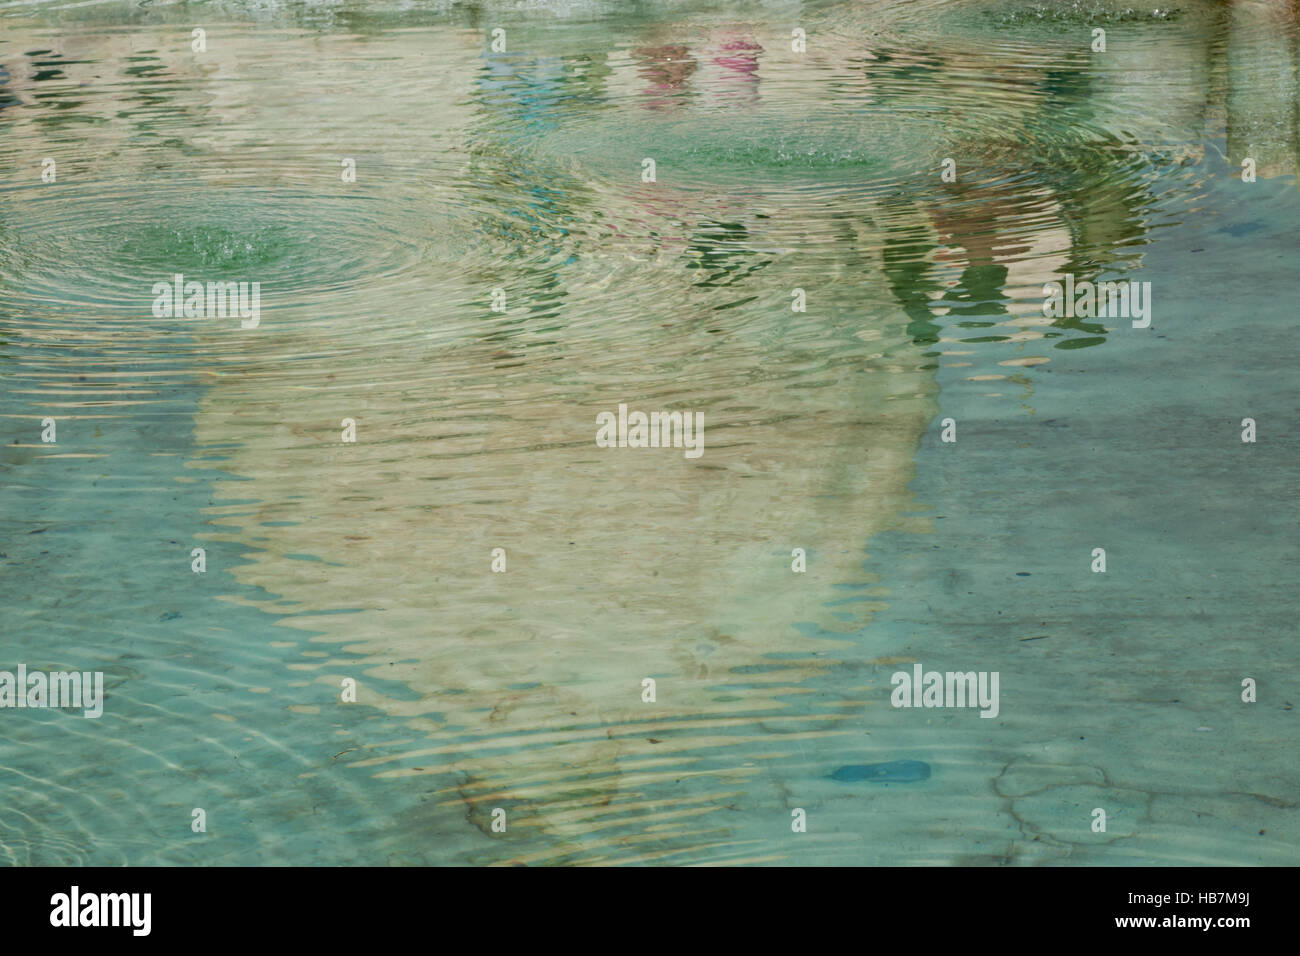 Reflection of the Taj Mahal dome in a pool of water. Stock Photo